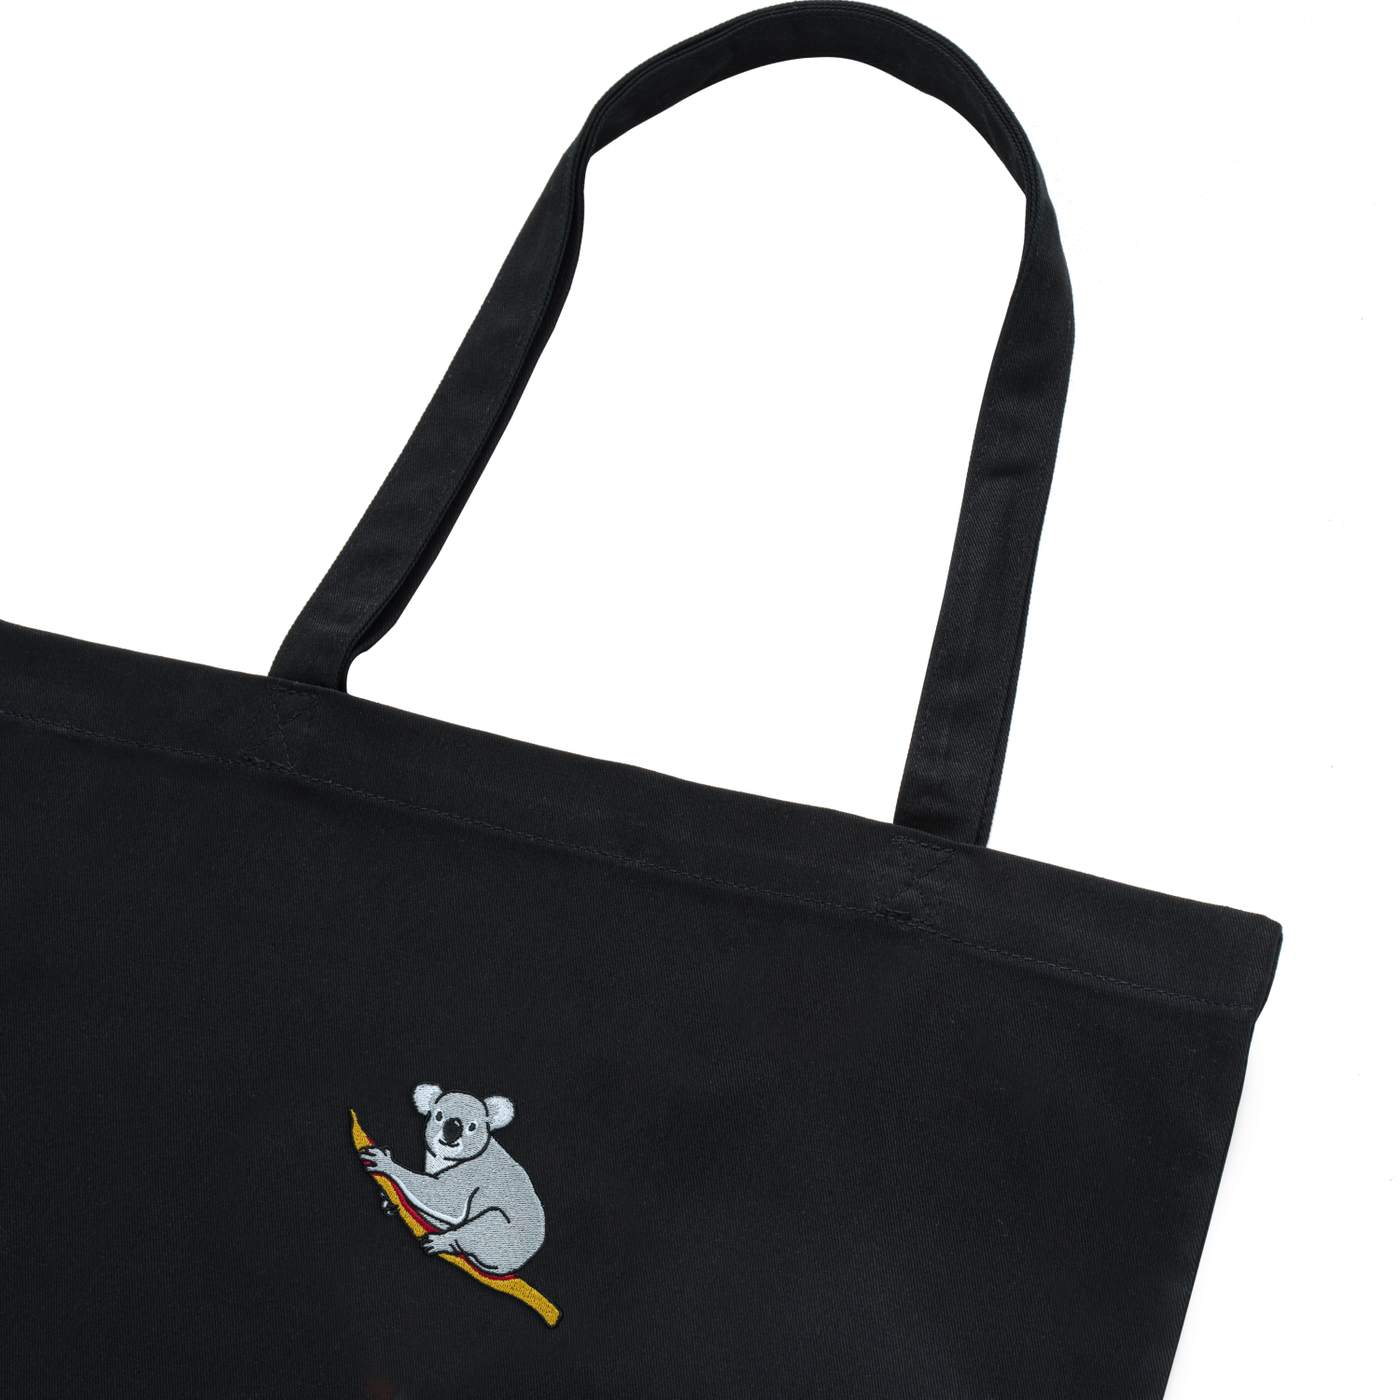 Bobby's Planet Embroidered Koala Tote Bag from Australia Down Under Animals Collection in Black Color#color_black